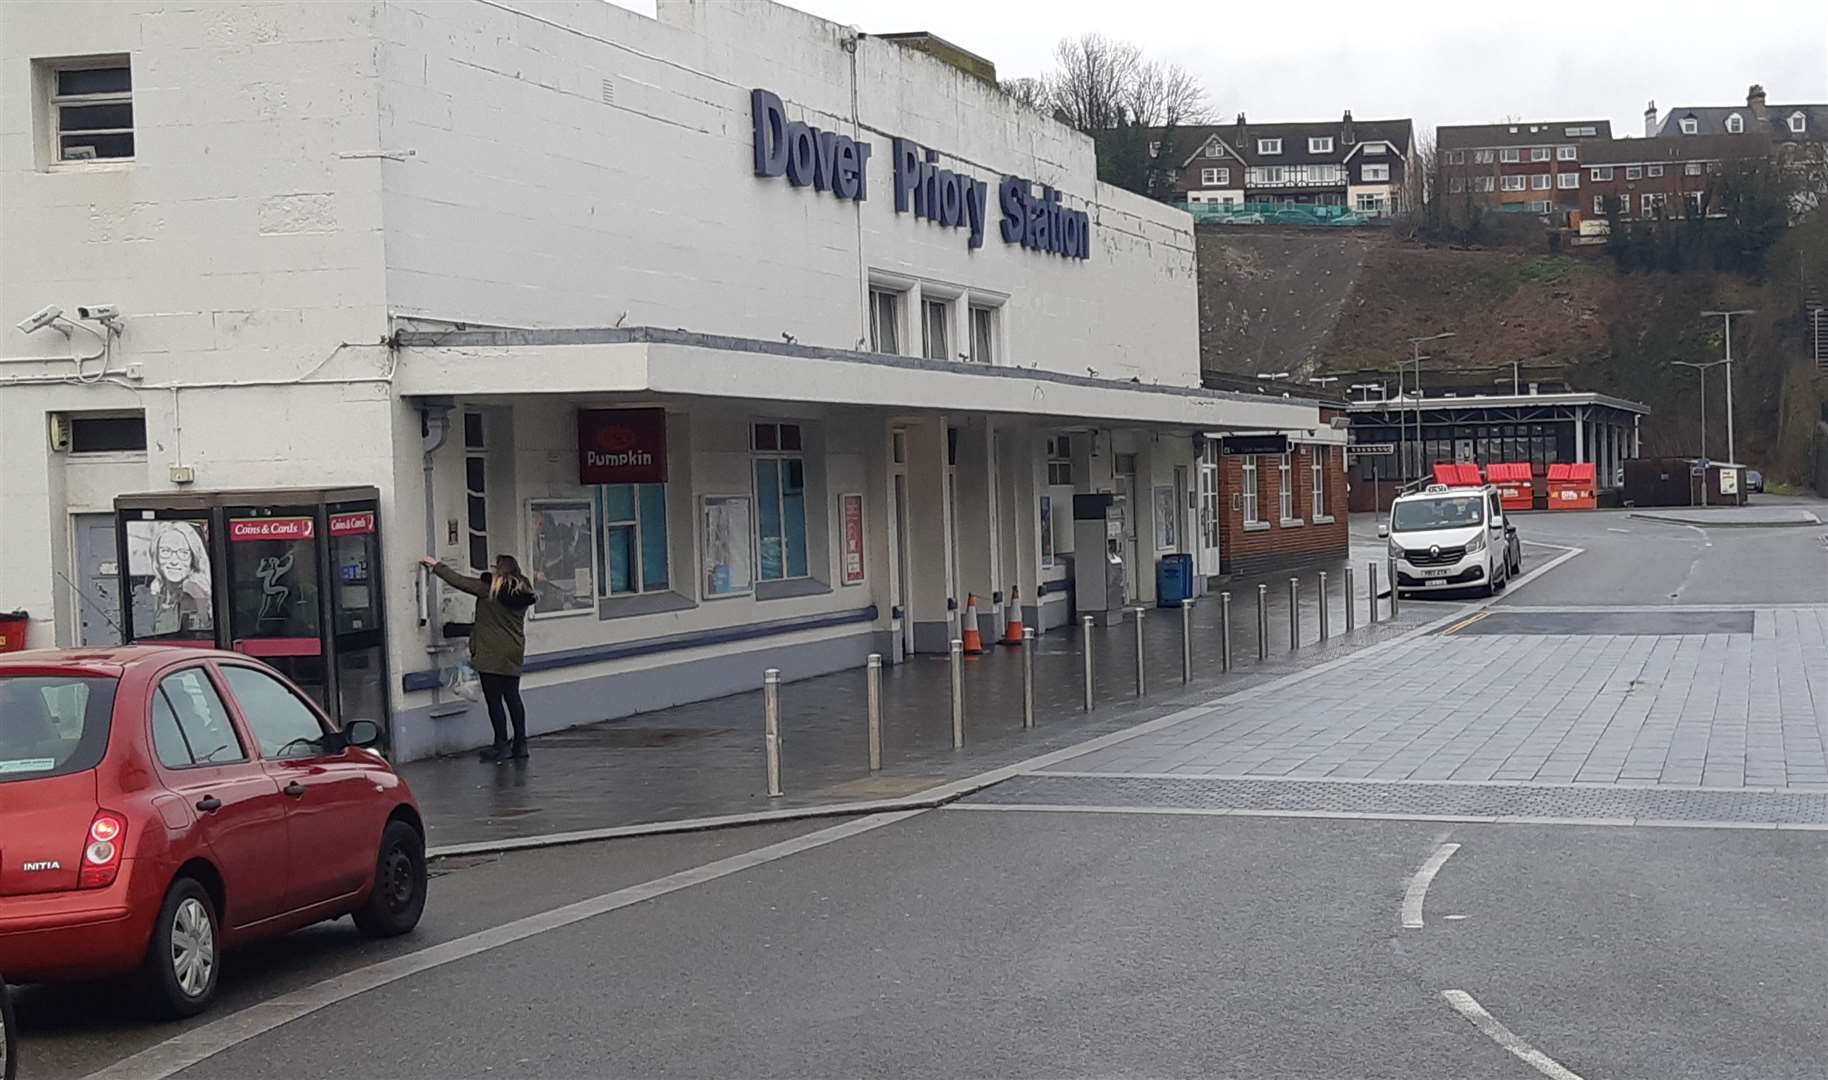 The route will connect Whitfield with Dover's town centre and station